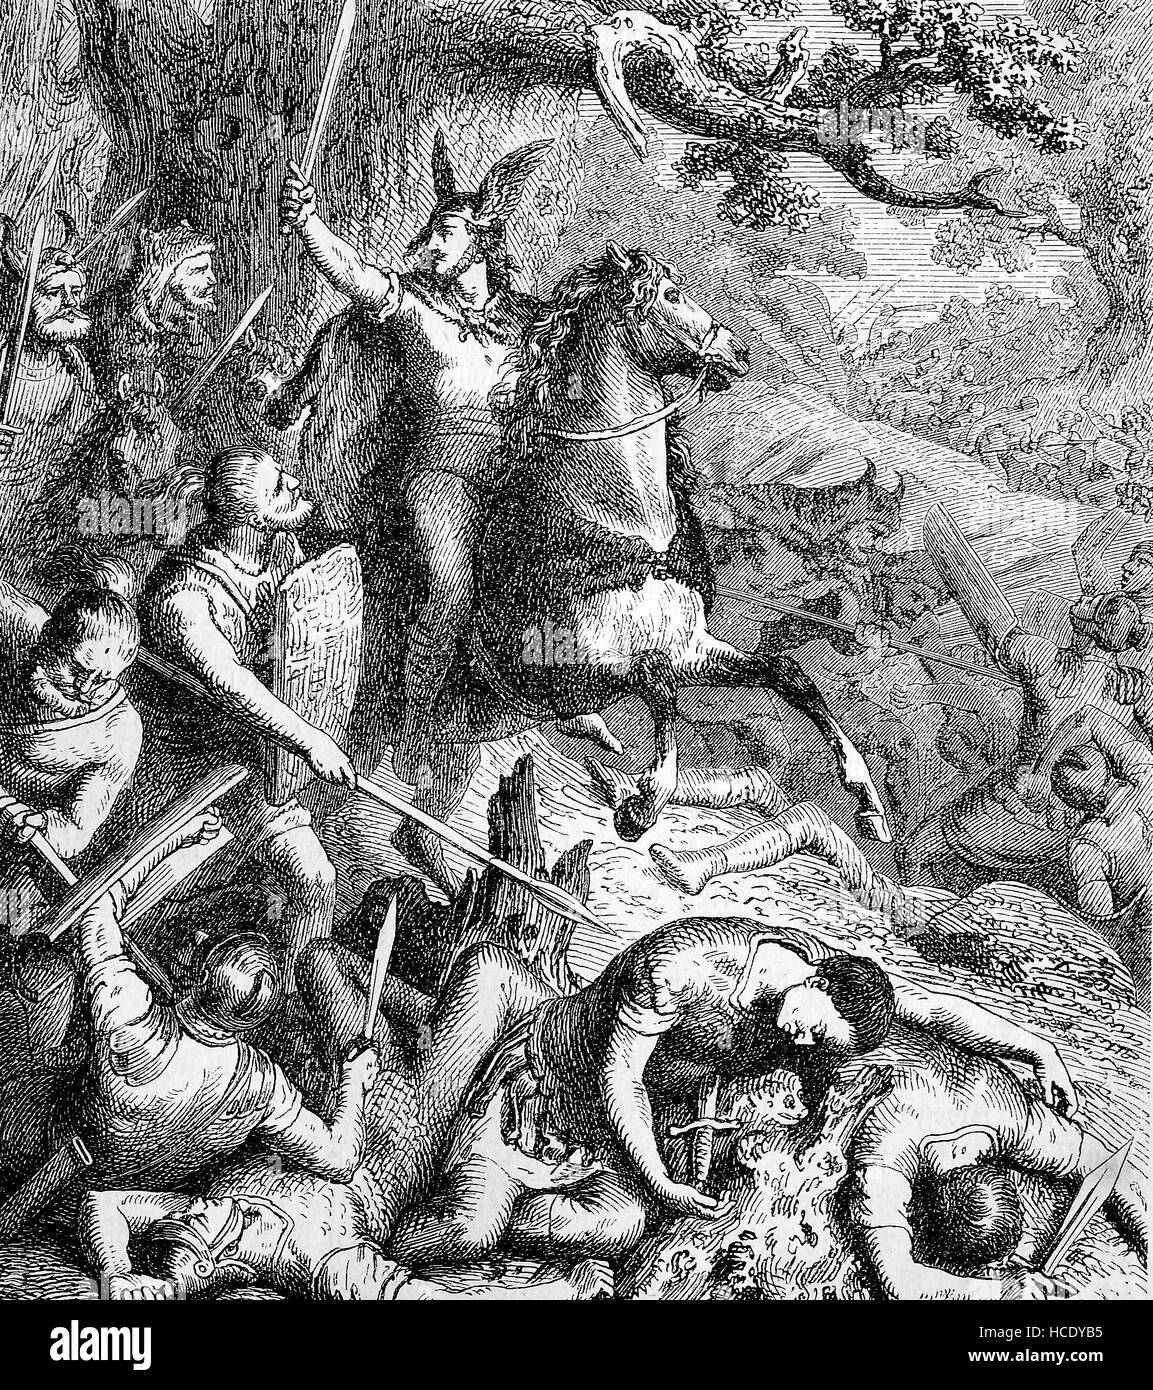 fight between romans and germans, teutons, The Battle of the Teutoburg Forest, Schlacht im Teutoburger Wald, Hermannsschlacht, or Varusschlacht, year 9 AD, the story of the ancient Rome, roman Empire, Italy Stock Photo